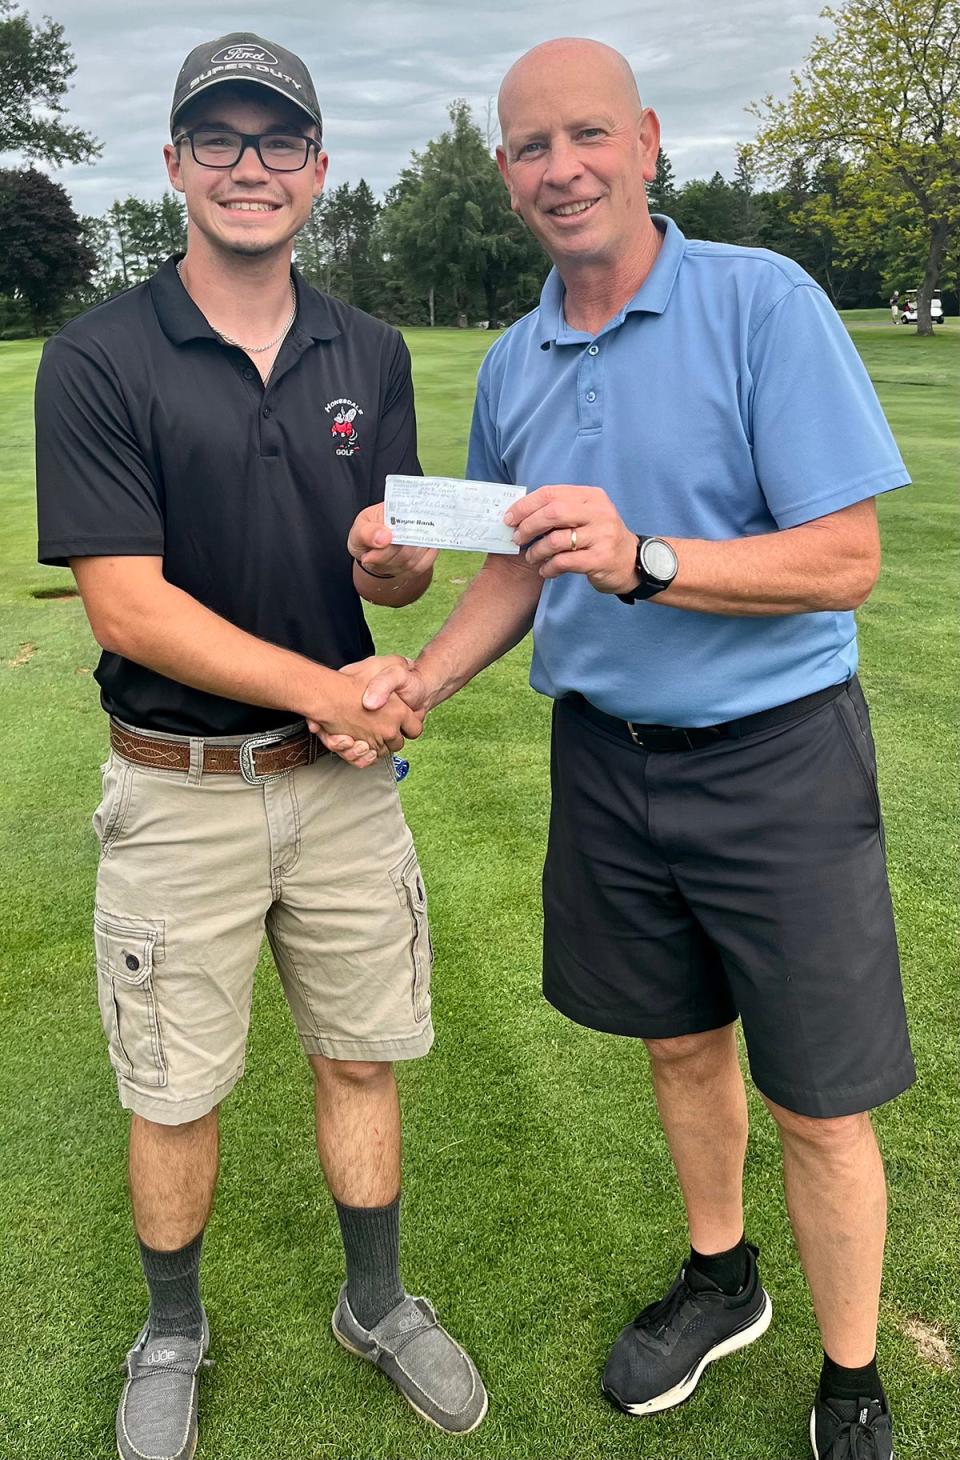 Honesdale's Lake LeClere (left) has received a $500 scholarship from the Cricket Hill Men's Golf League. Pictured here with Lake is Hornet Head Coach Mike Miller (right)